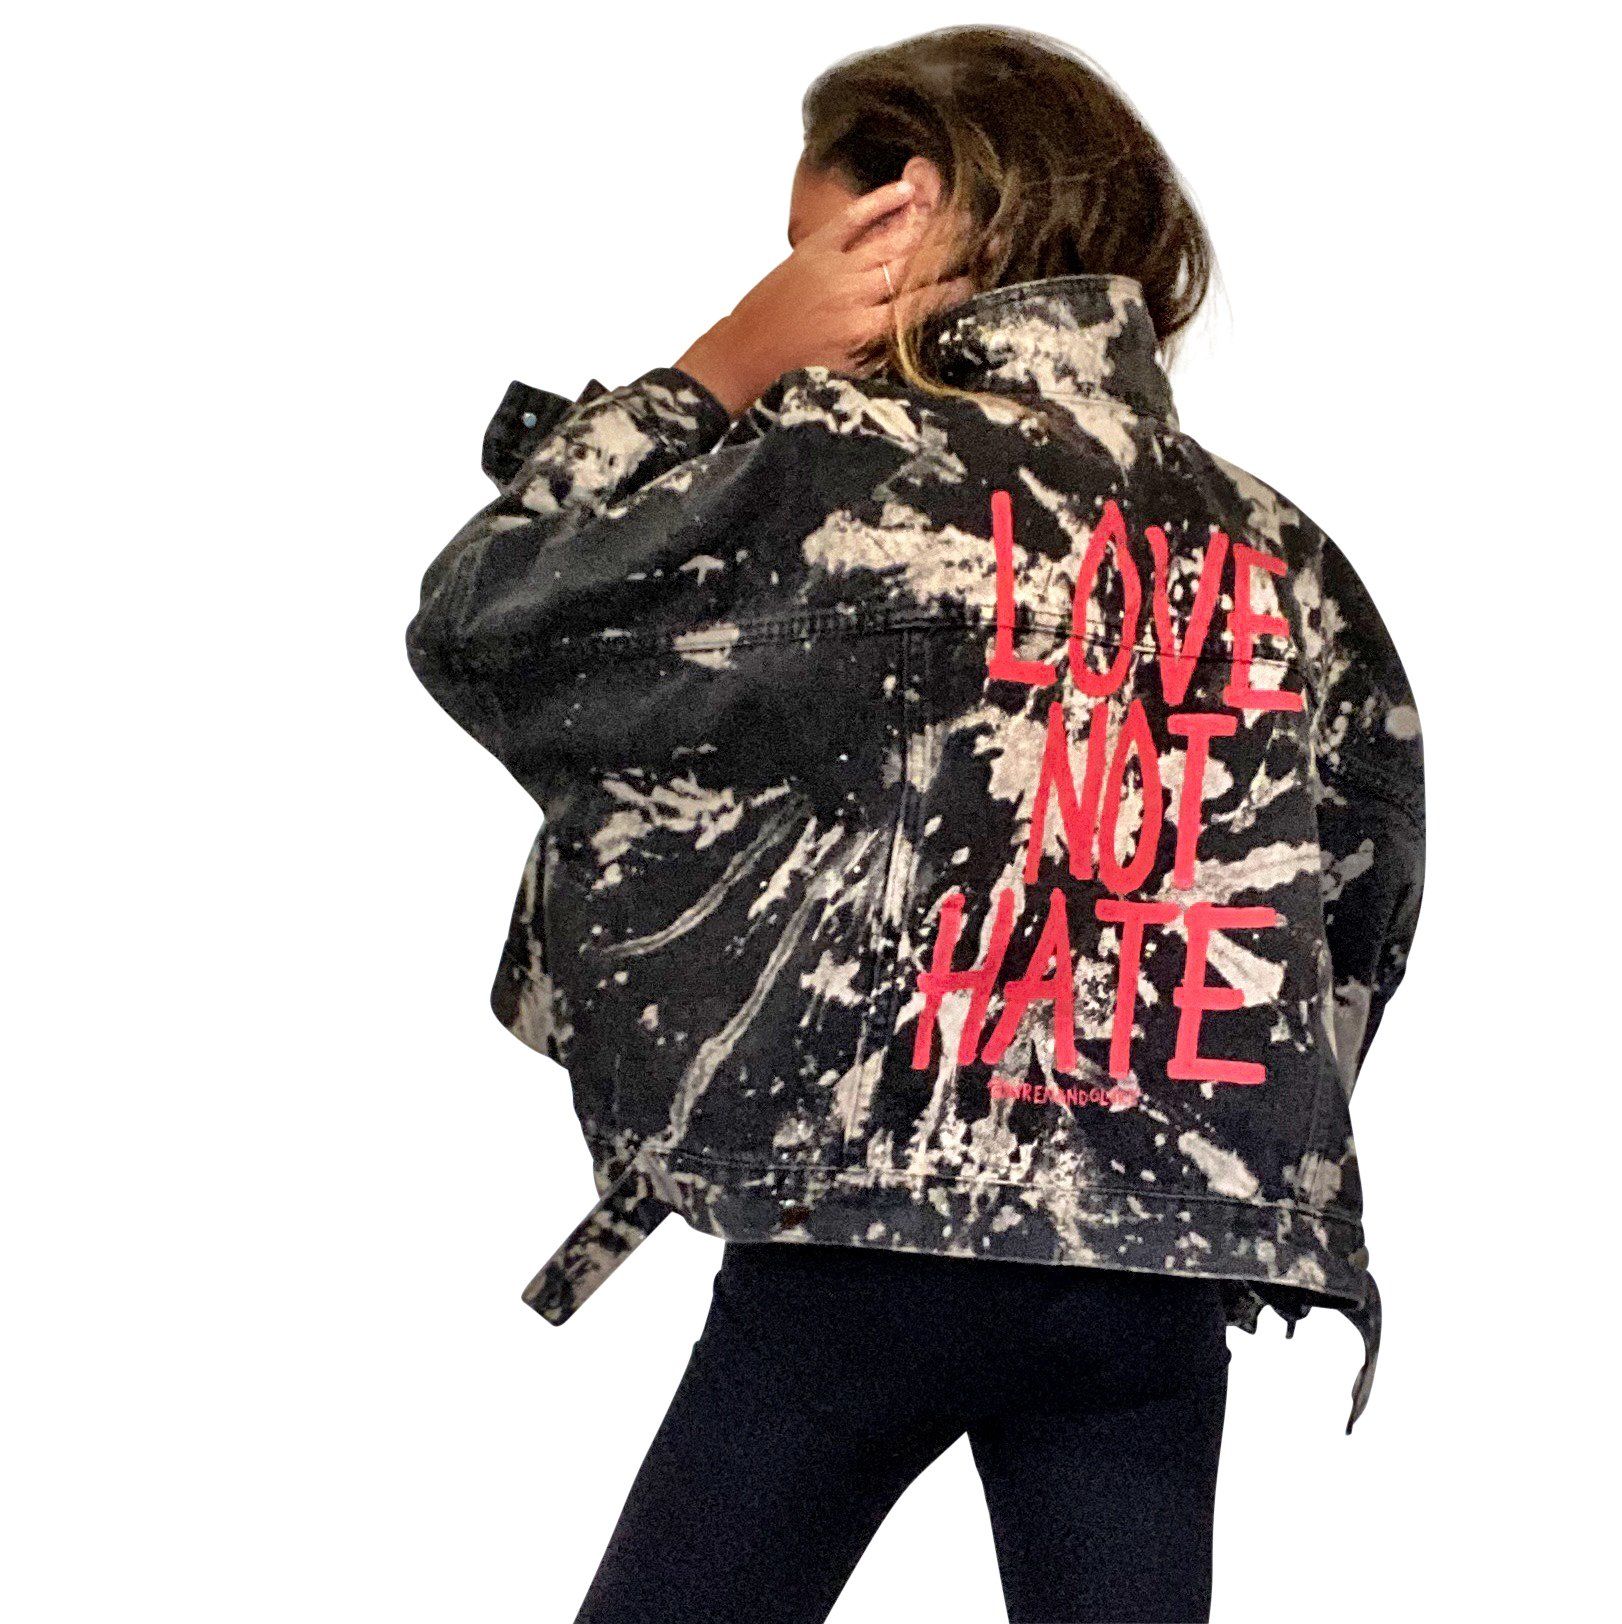 Black denim jacket. Reverse tie dye pattern throughout jacket. LOVE NOT HATE painted in red on back. Signed @wrenandglory